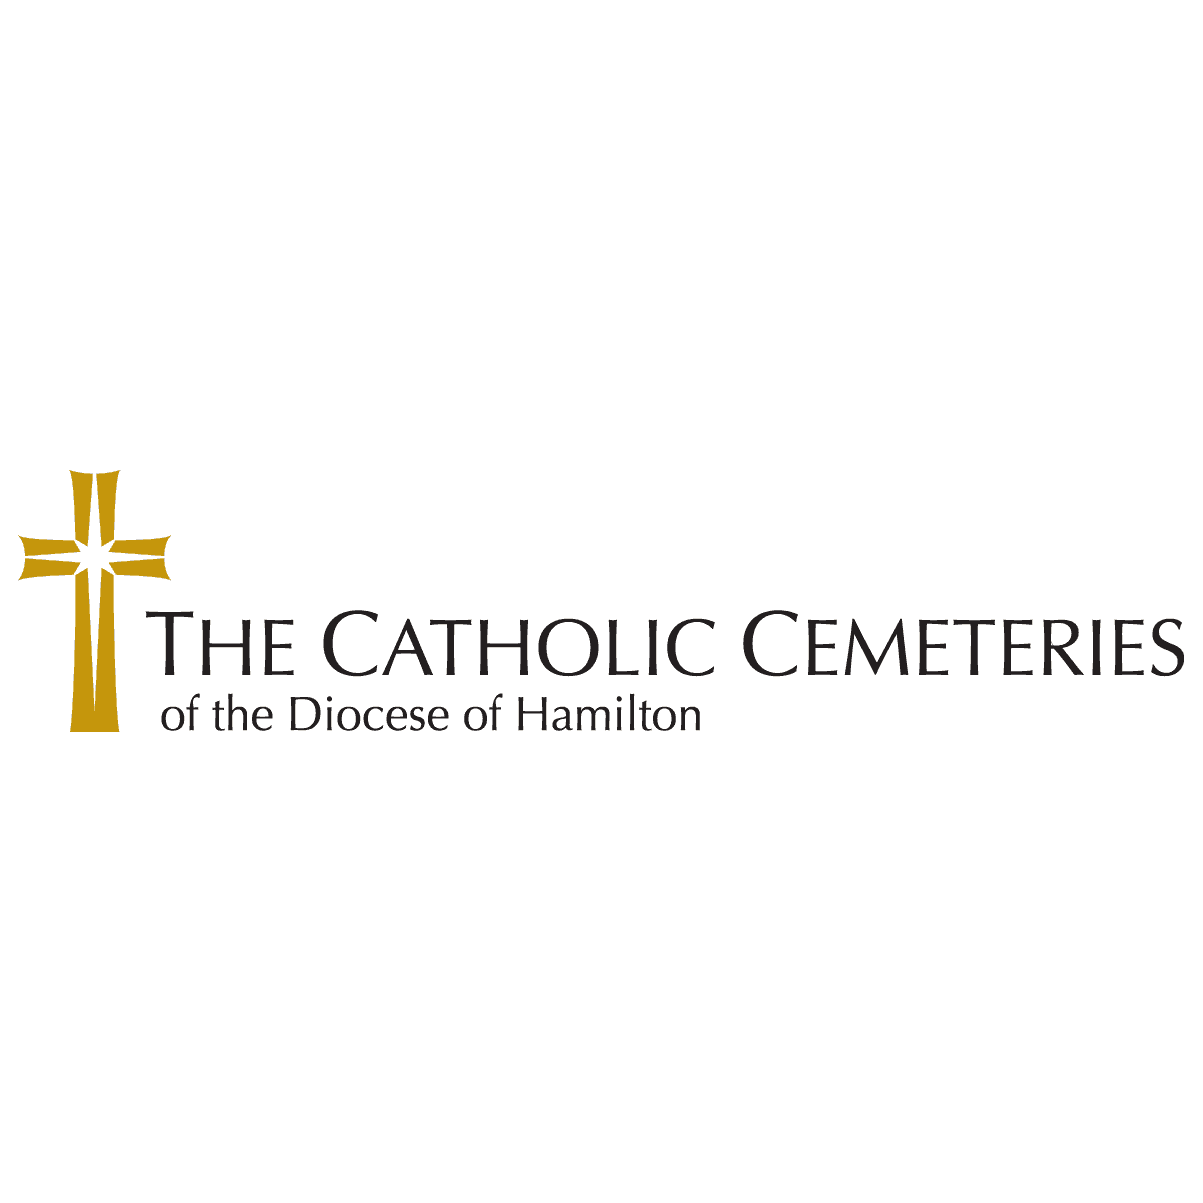 <p>The Catholic Cemeteries of the Diocese of Hamilton</p> logo